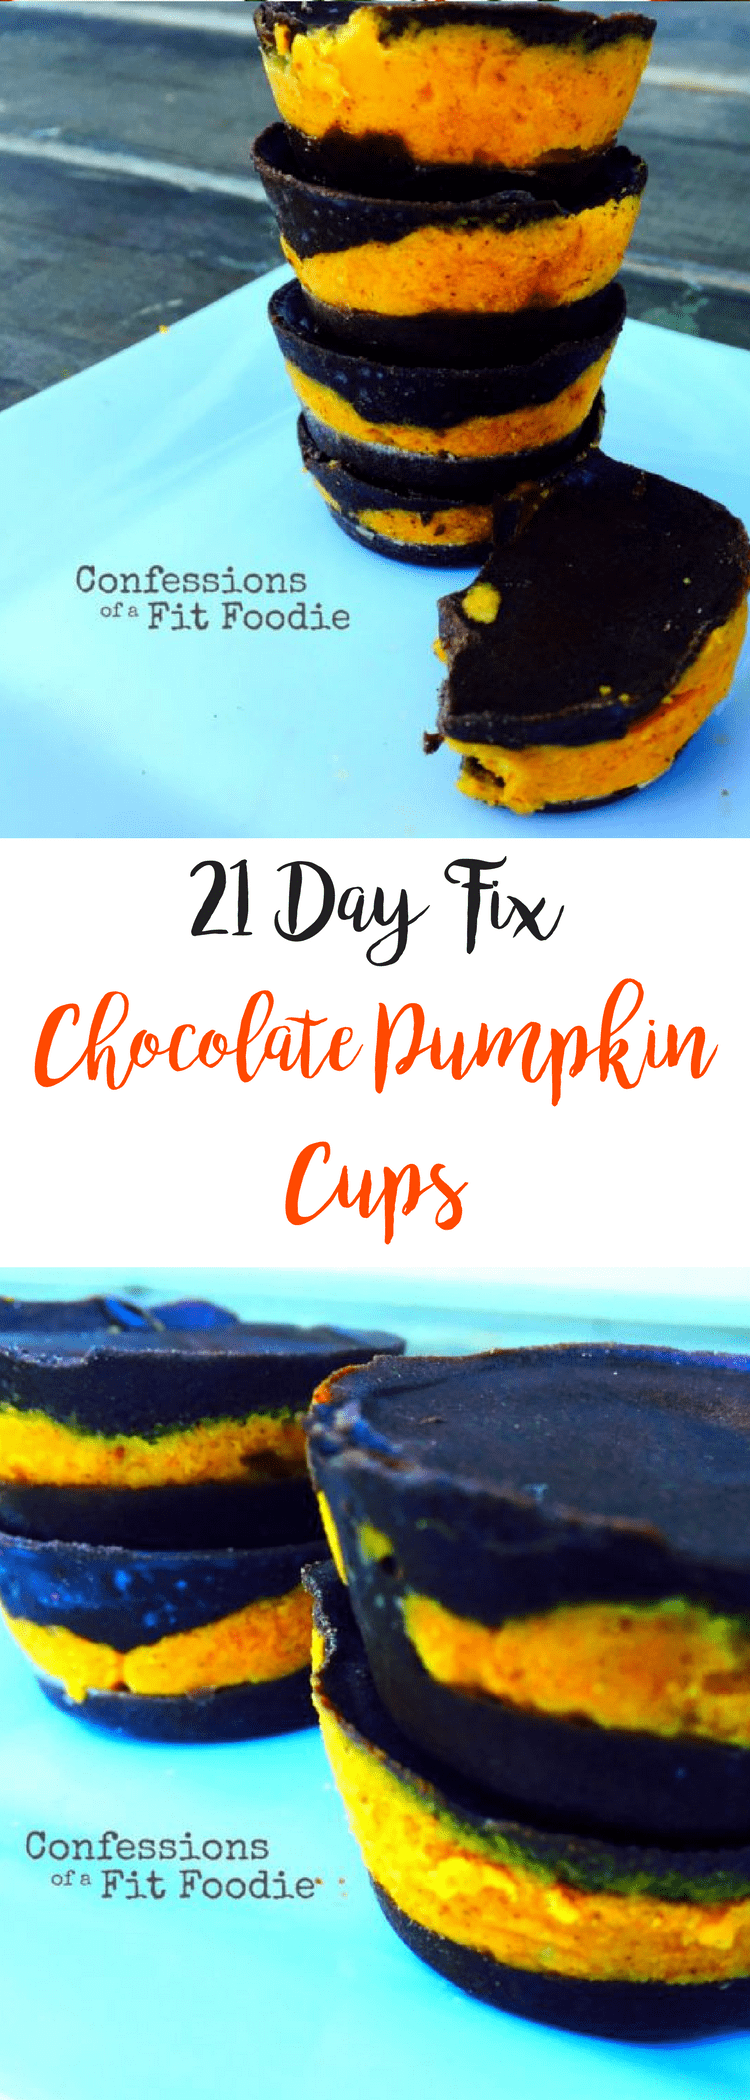 Chocolate Pumpkin Cups | Confessions of a Fit Foodie